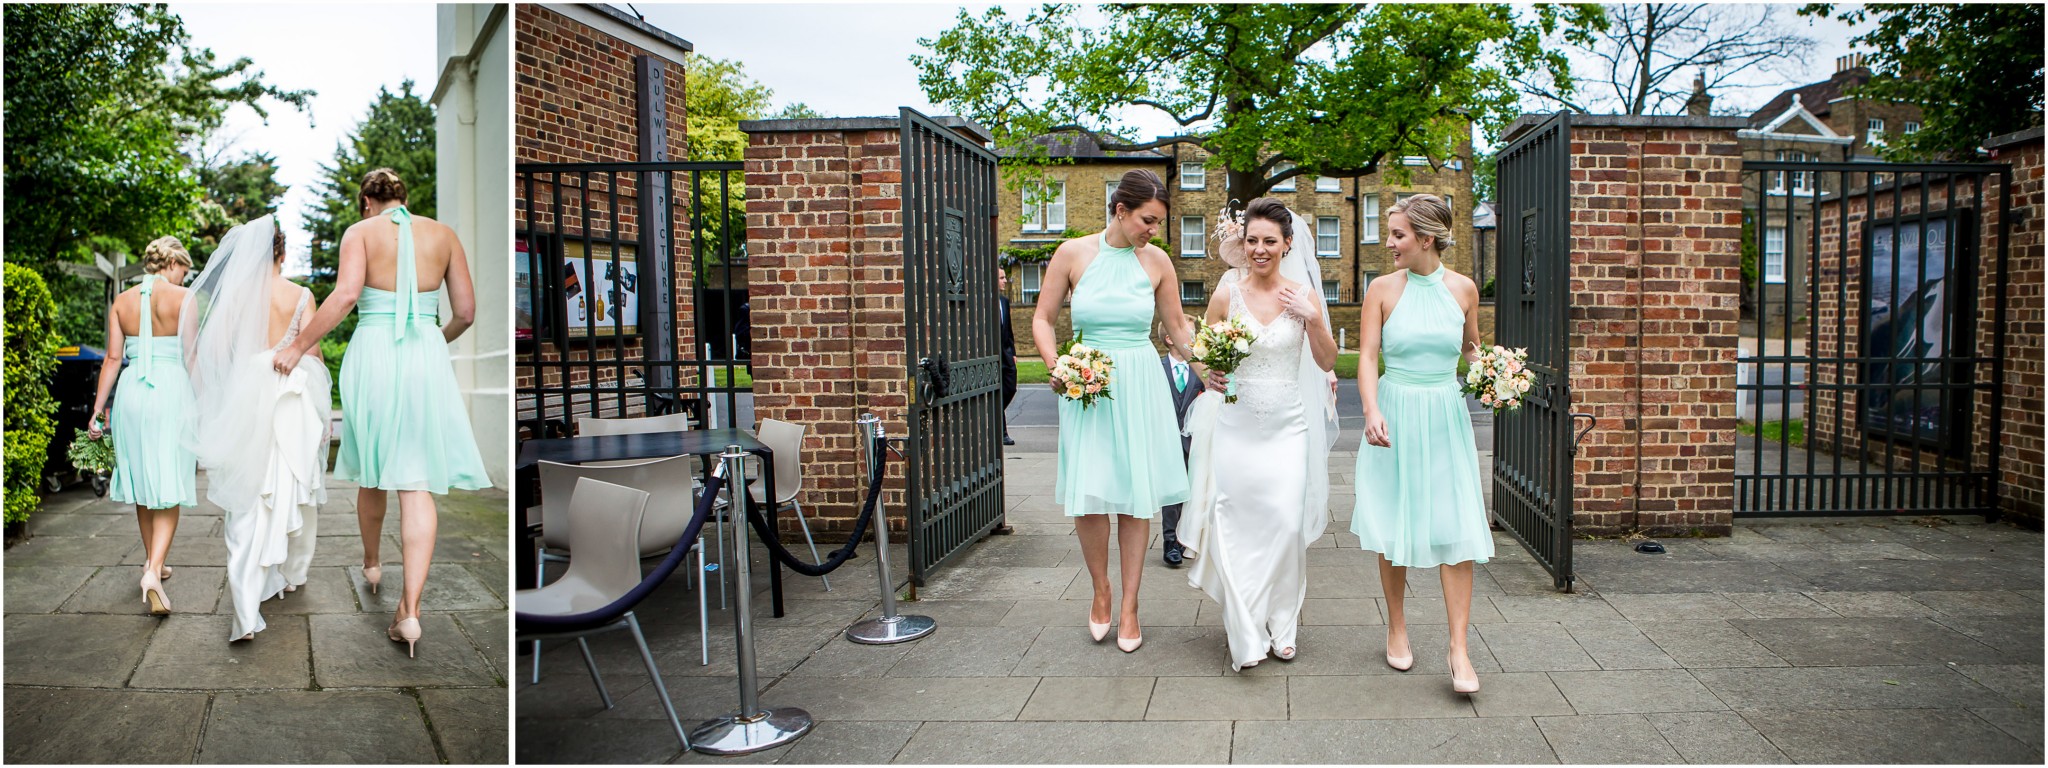 dulwich-picture-gallery-wedding-photography-038